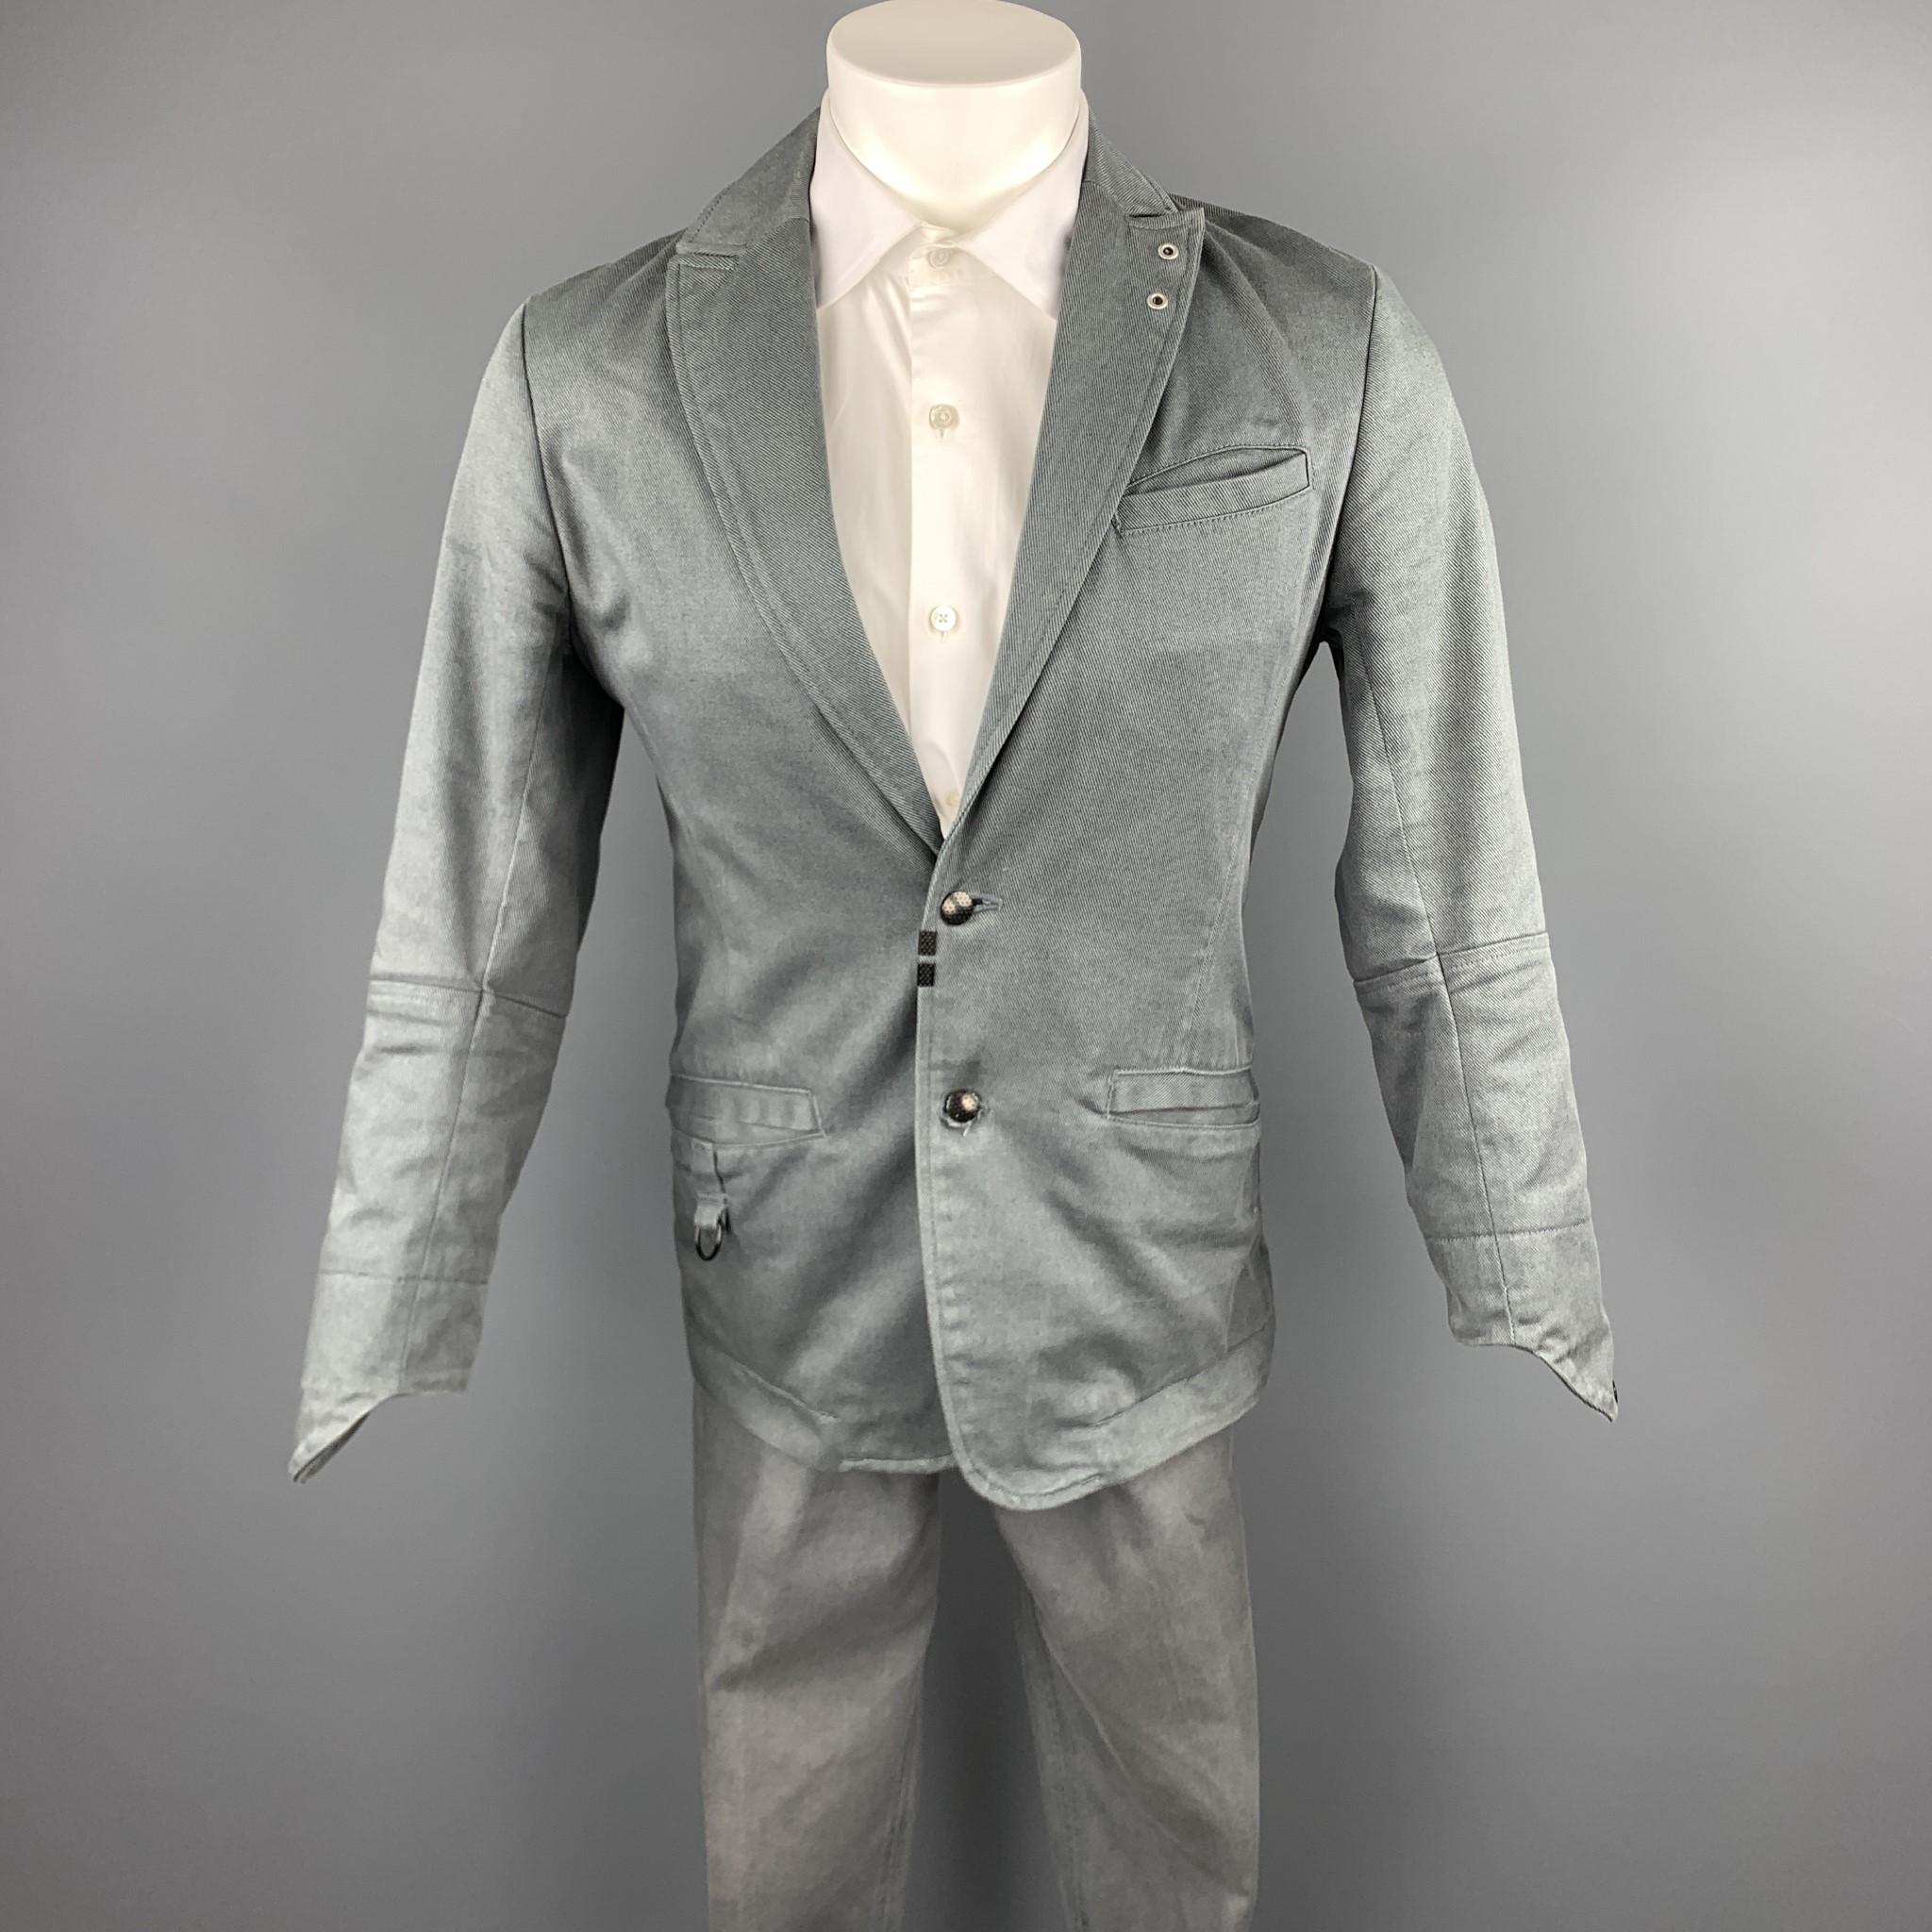 DIESEL suit comes in a gray cotton blend and includes a single breasted, two button sport coat with a peak lapel and matching flat front trousers. 

Excellent Pre-Owned Condition.
Marked: S

Measurements:

-Jacket
Shoulder: 16 in. 
Chest: 38 in.